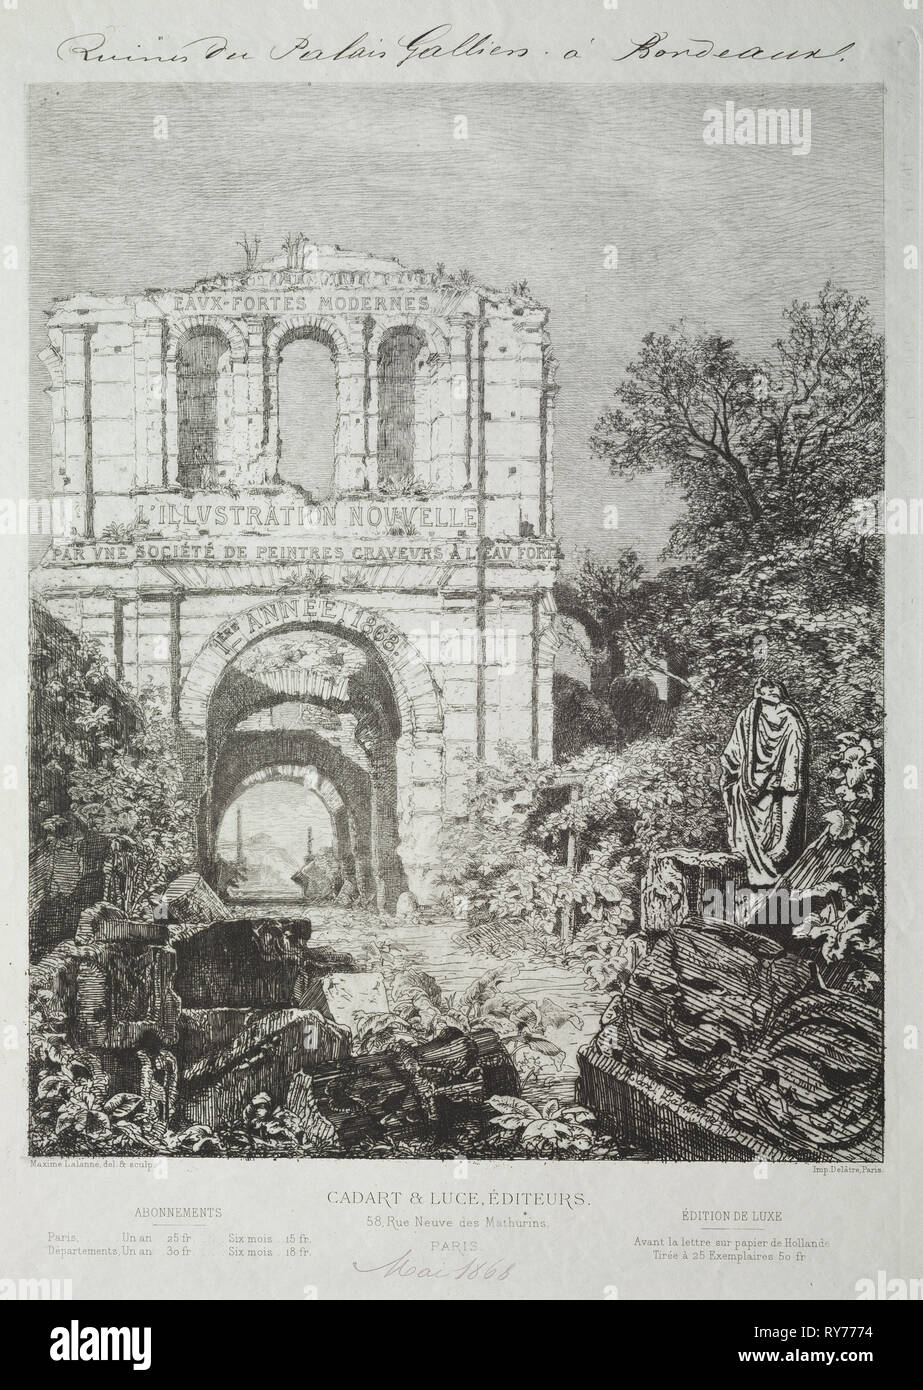 made to be frontispiece for L'Illustration Nouvelle for 1868 but not used: Ruins of the Gallien Palace in Bordeaux, 1866-1868. Maxime Lalanne (French, 1827-1886), Cadart & Luce, Paris. Etching; sheet: 42.3 x 29.7 cm (16 5/8 x 11 11/16 in.); platemark: 35.2 x 26 cm (13 7/8 x 10 1/4 in Stock Photo